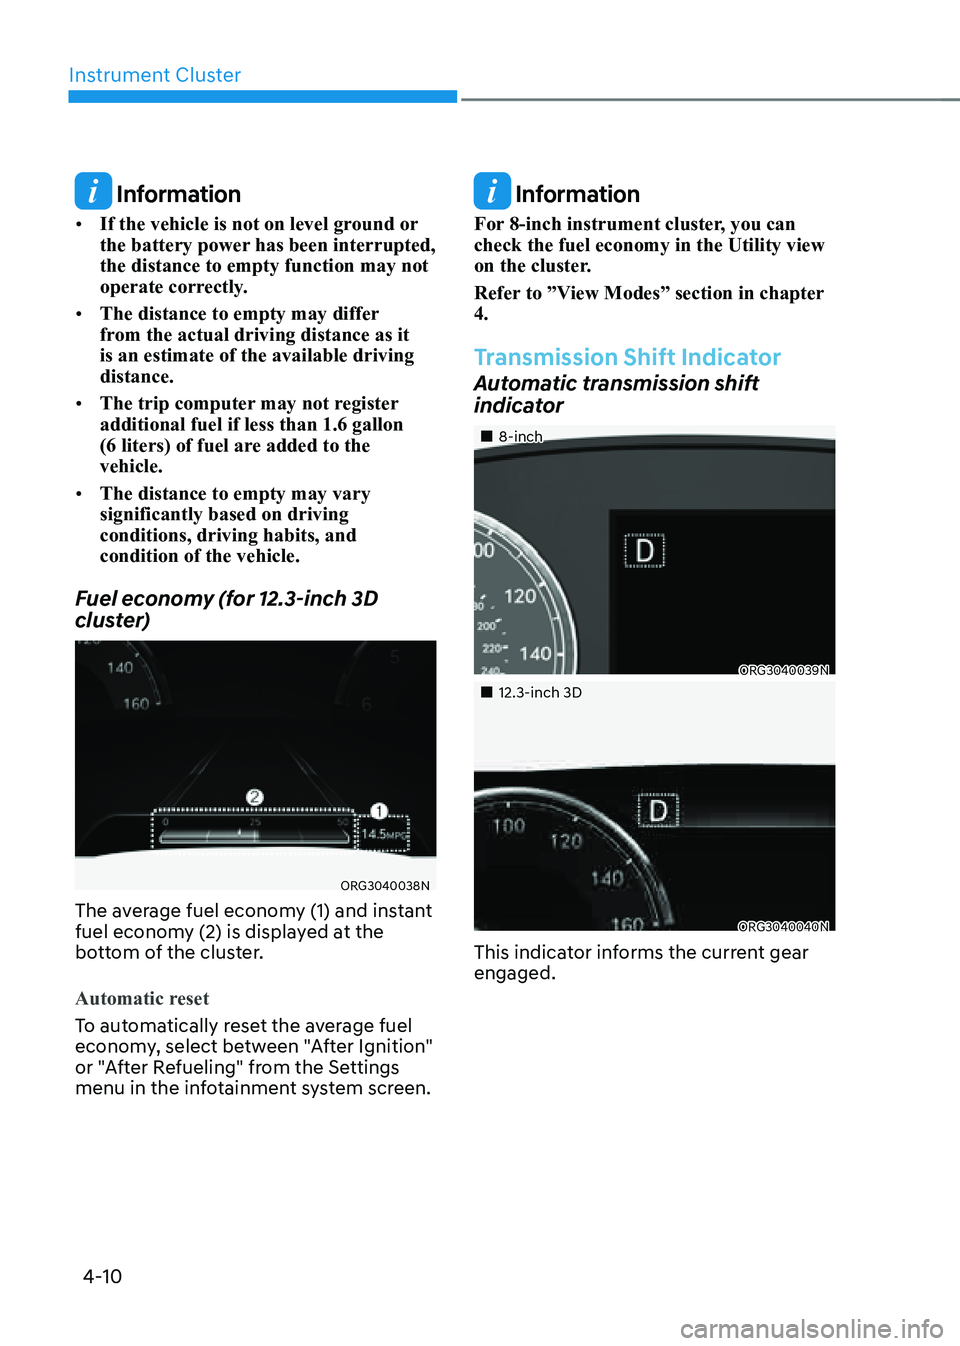 GENESIS G80 2021  Owners Manual Instrument Cluster
4-10
 Information
• If the vehicle is not on level ground or 
the battery power has been interrupted, 
the distance to empty function may not 
operate correctly.
• The distance 